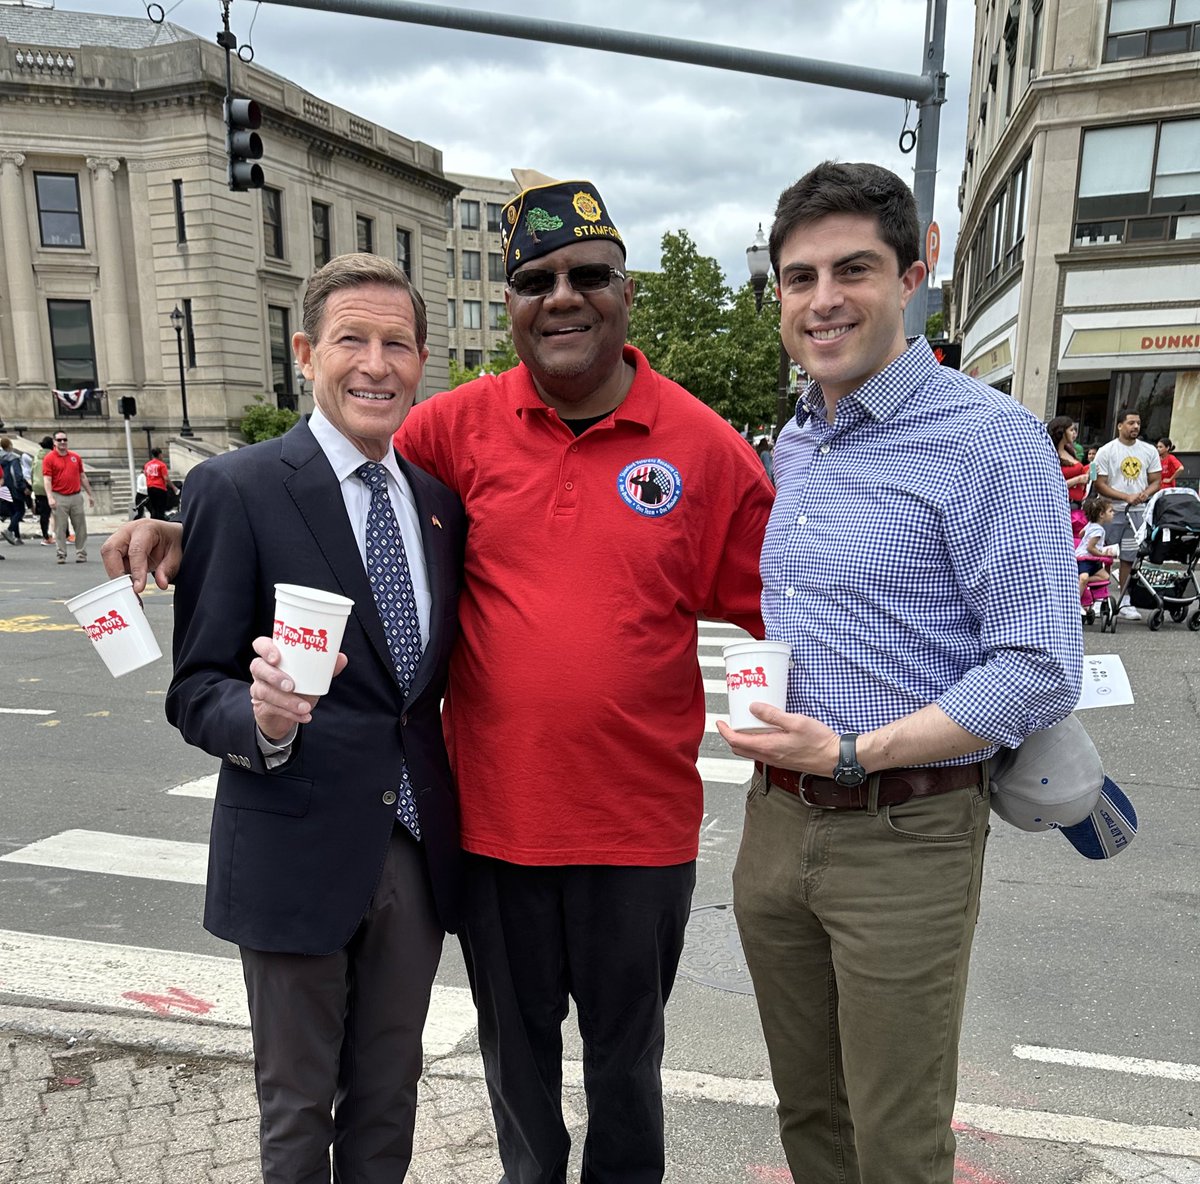 Great to see so many friends for today’s Stamford #MemorialDay parade and ceremony. Thanks to all who helped us honor the fallen, and who’ve helped build Veterans Park into the beautiful place it is today.